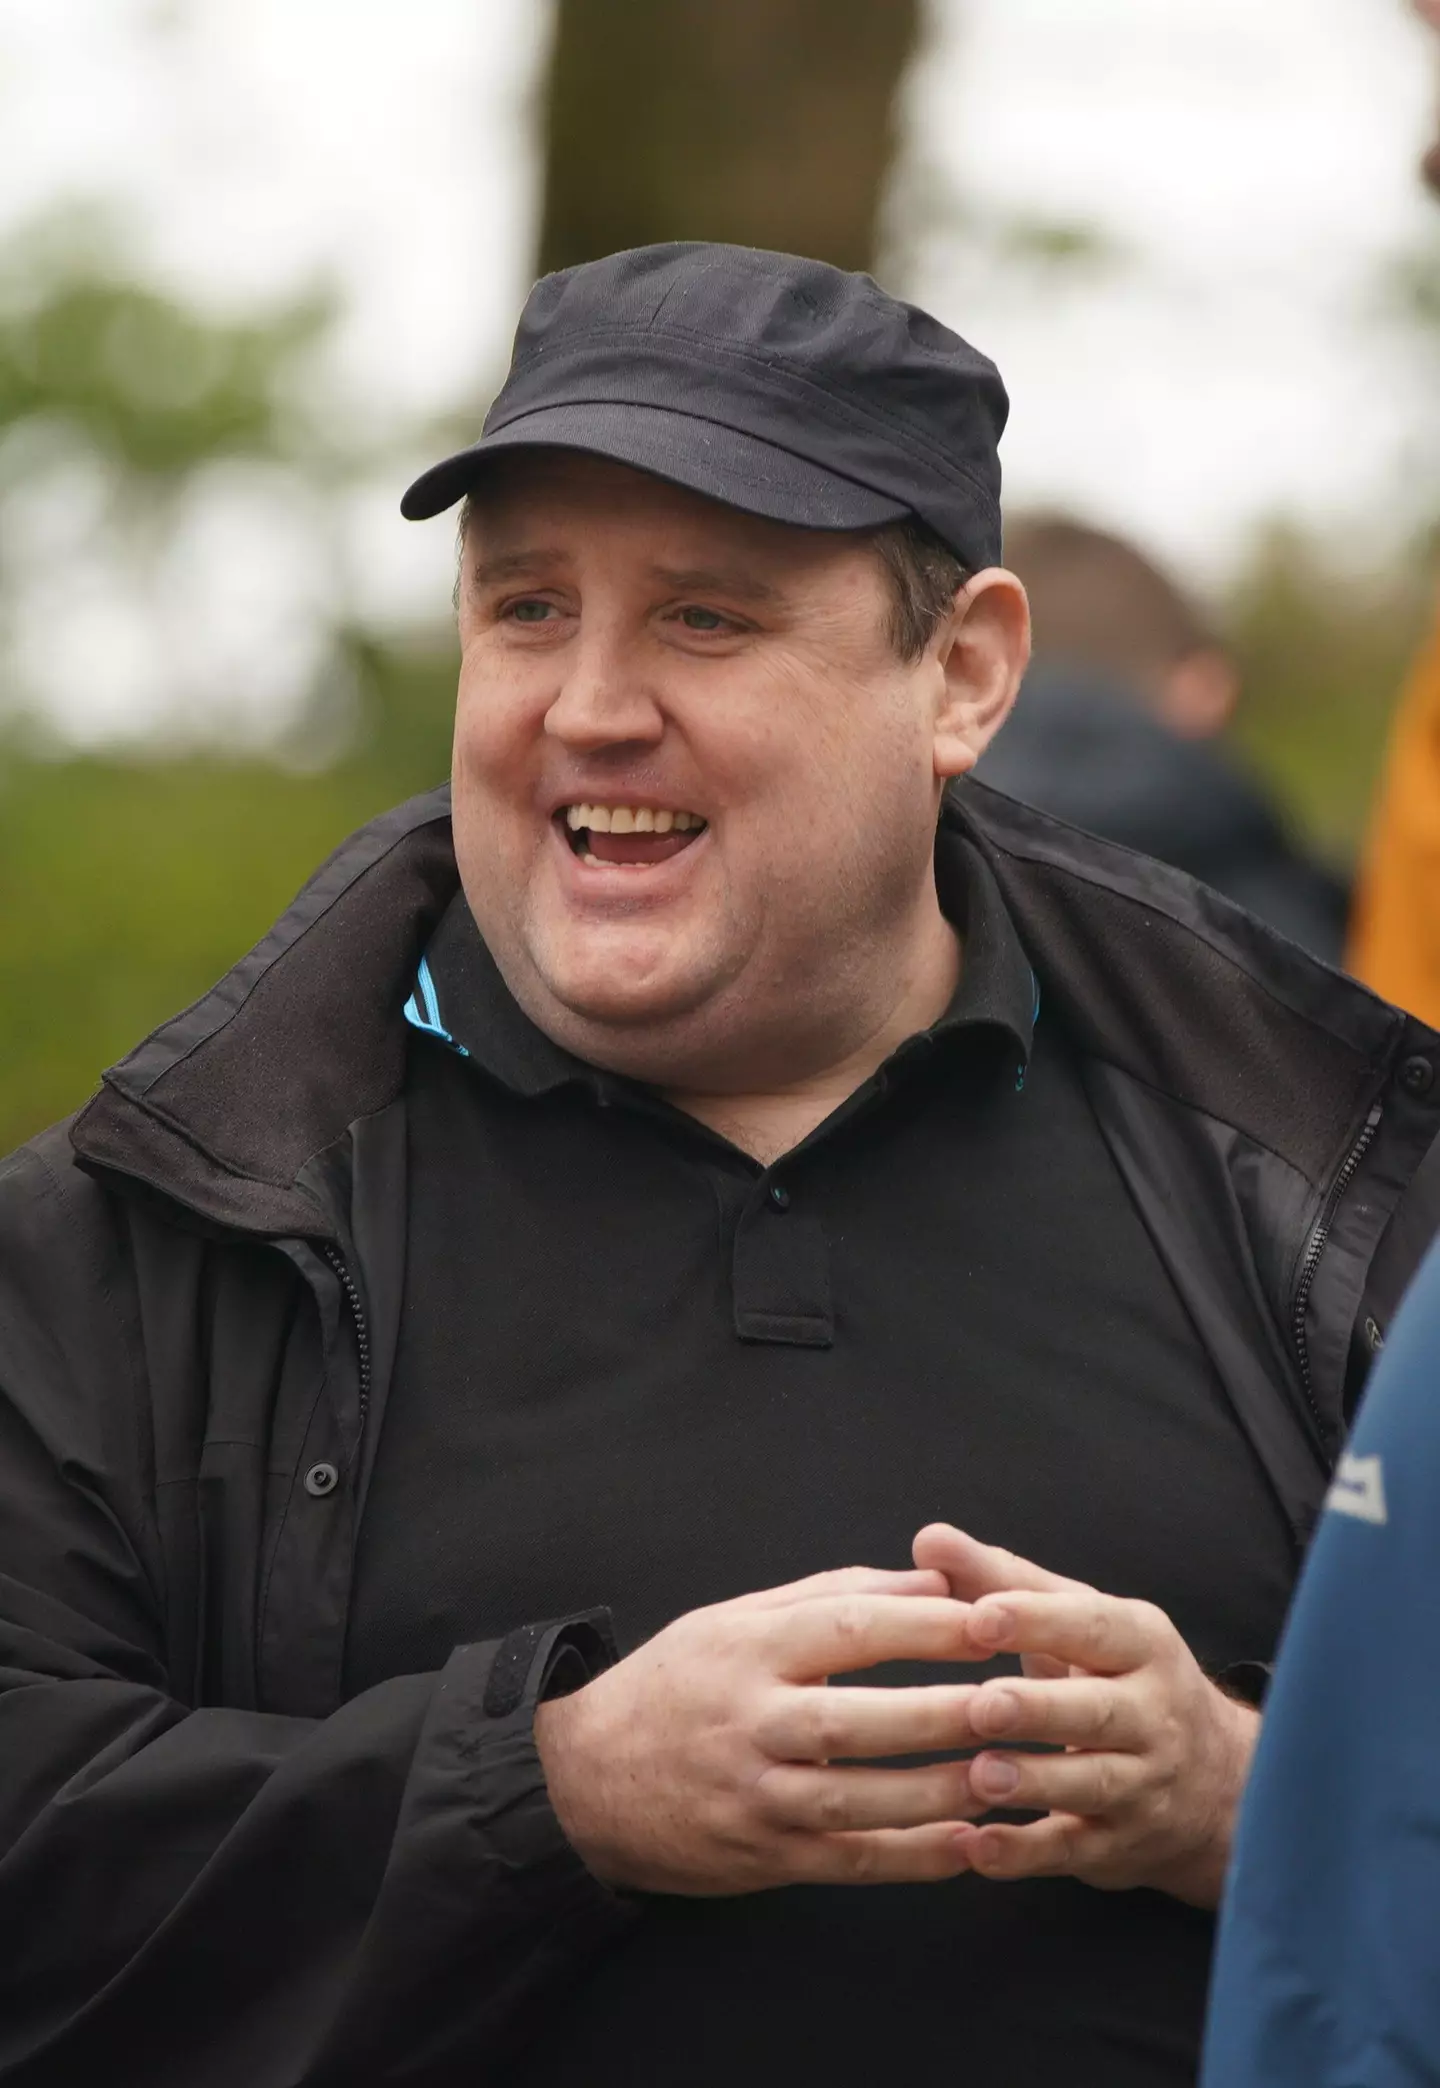 Peter Kay called out a heckler at his Liverpool show last night.